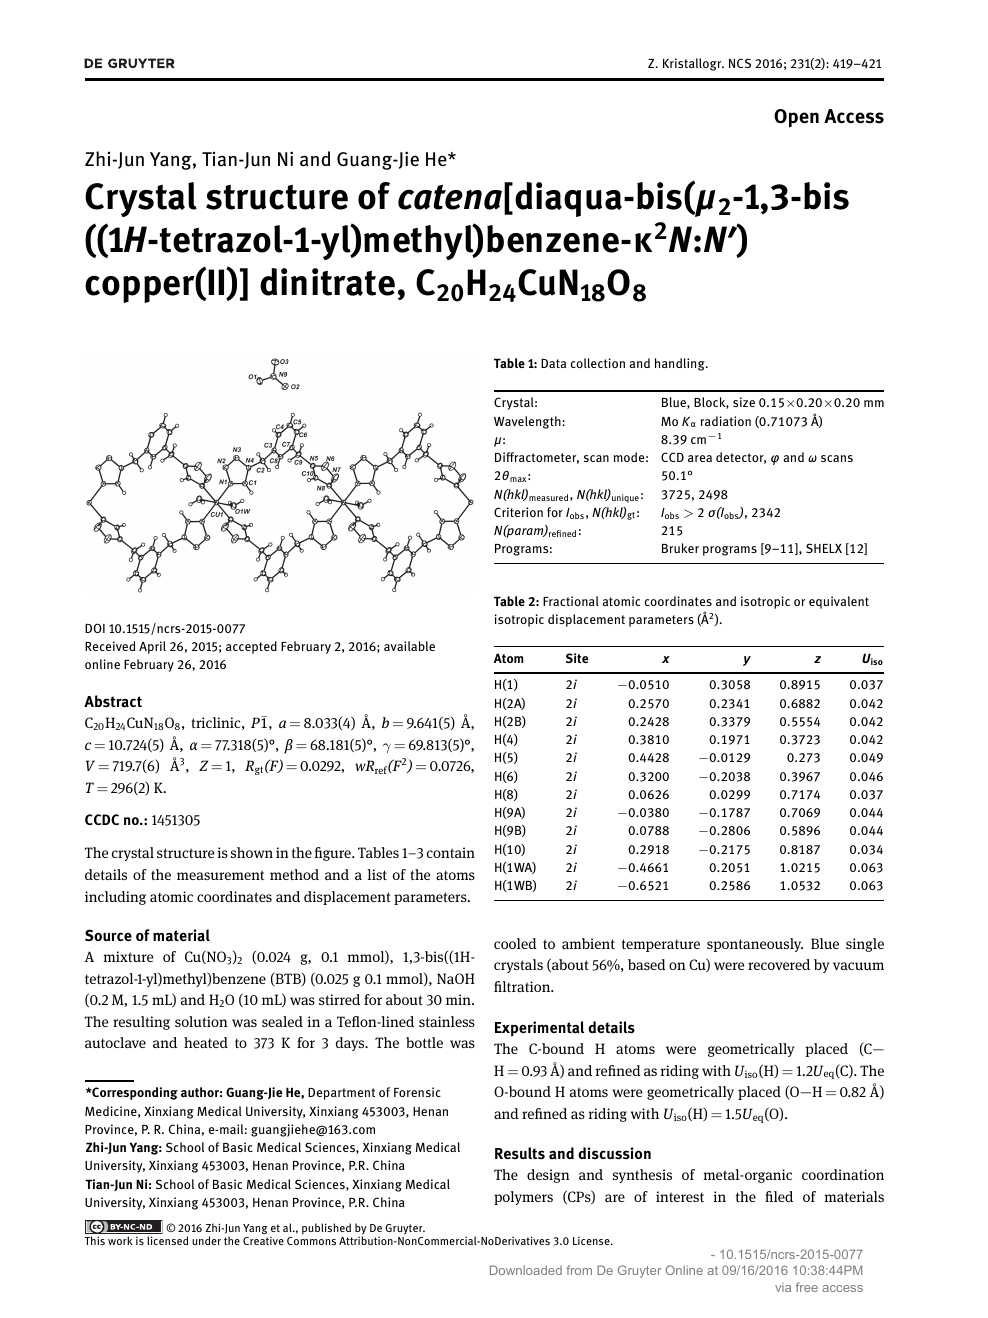 Crystal Structure Of Catena Diaqua Bis M2 1 3 Bis 1h Tetrazol 1 Yl Methyl Benzene K2n N Copper Ii Dinitrate Ch24cun18o8 Topic Of Research Paper In Chemical Sciences Download Scholarly Article Pdf And Read For Free On Cyberleninka Open Science